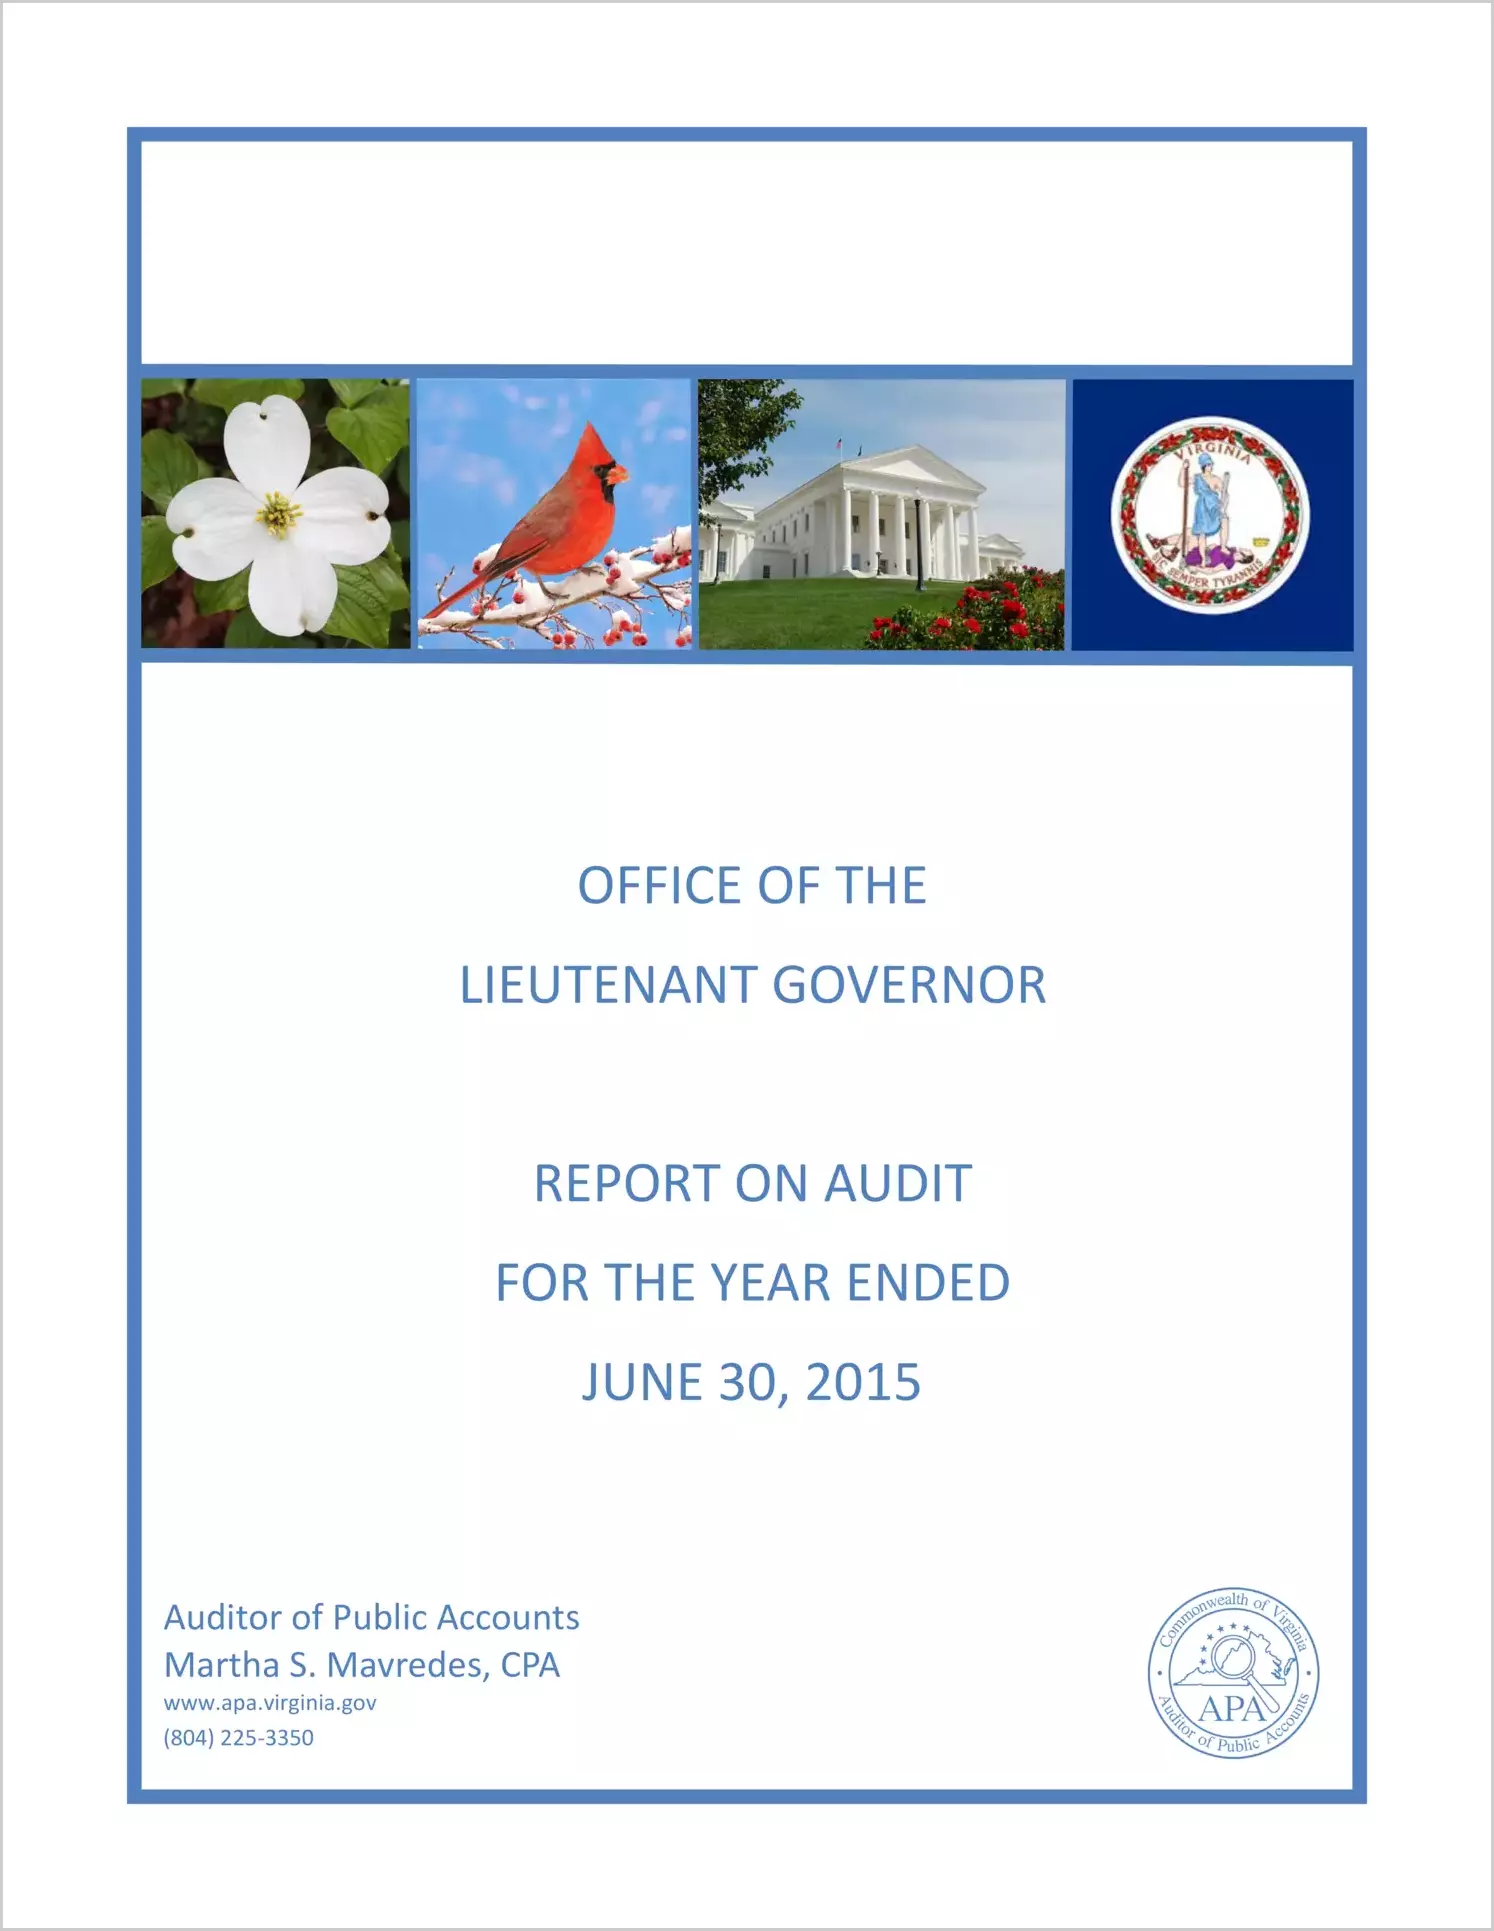 Office of the Lieutenant Governor for the year ended June 30, 2015